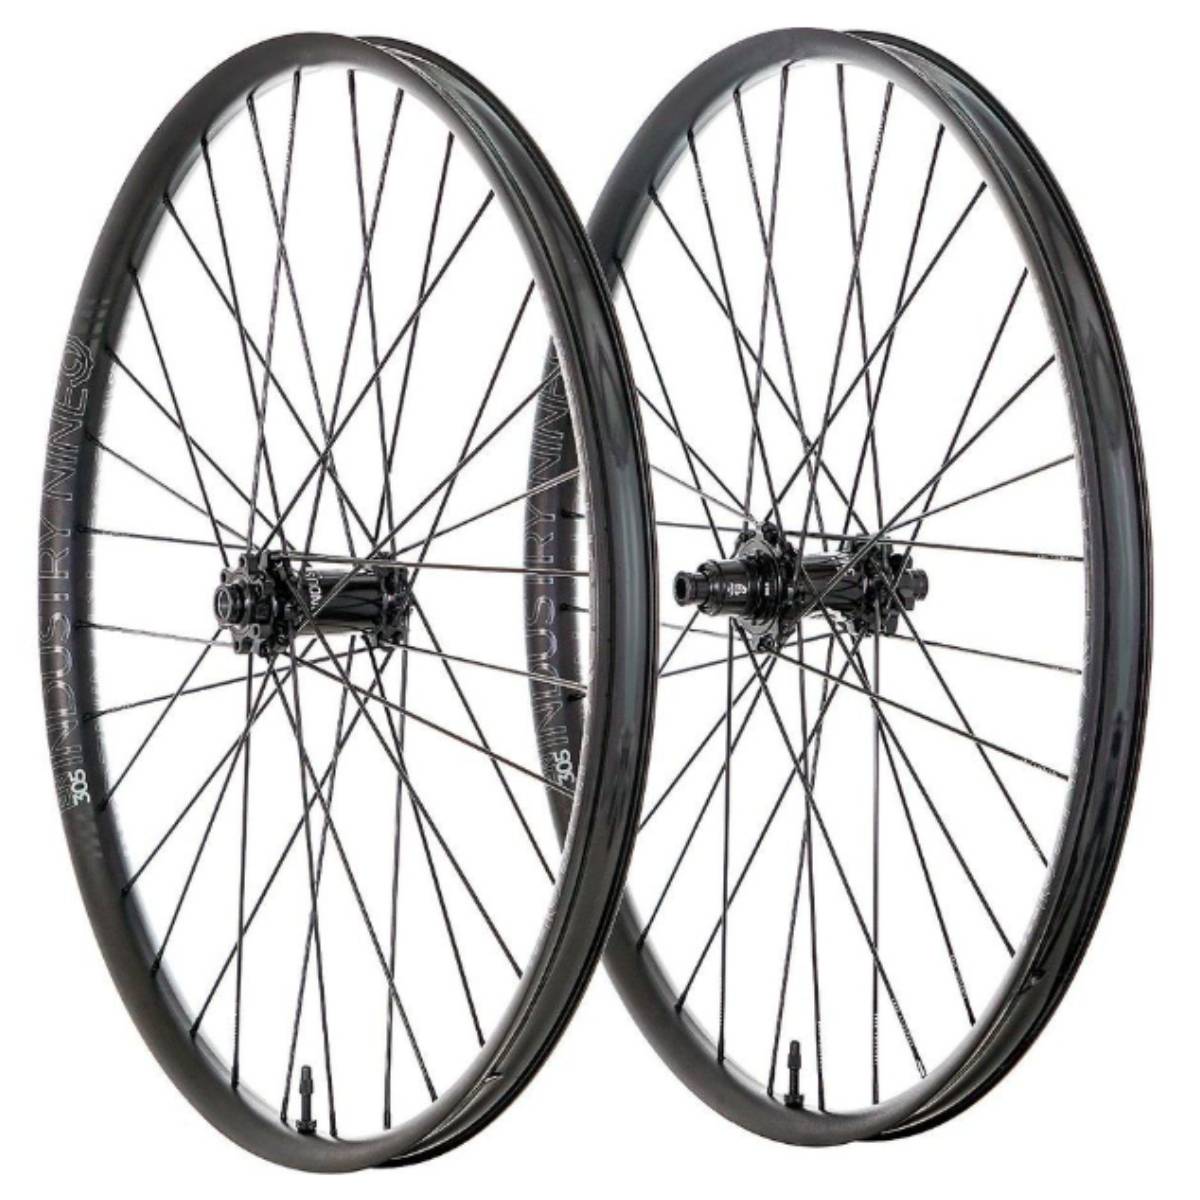 ROUES INDUSTRY 9 HYDRA ENDURO S 29 15X110/12X148  28 RAYONS 6 BOLTS XD NOIR